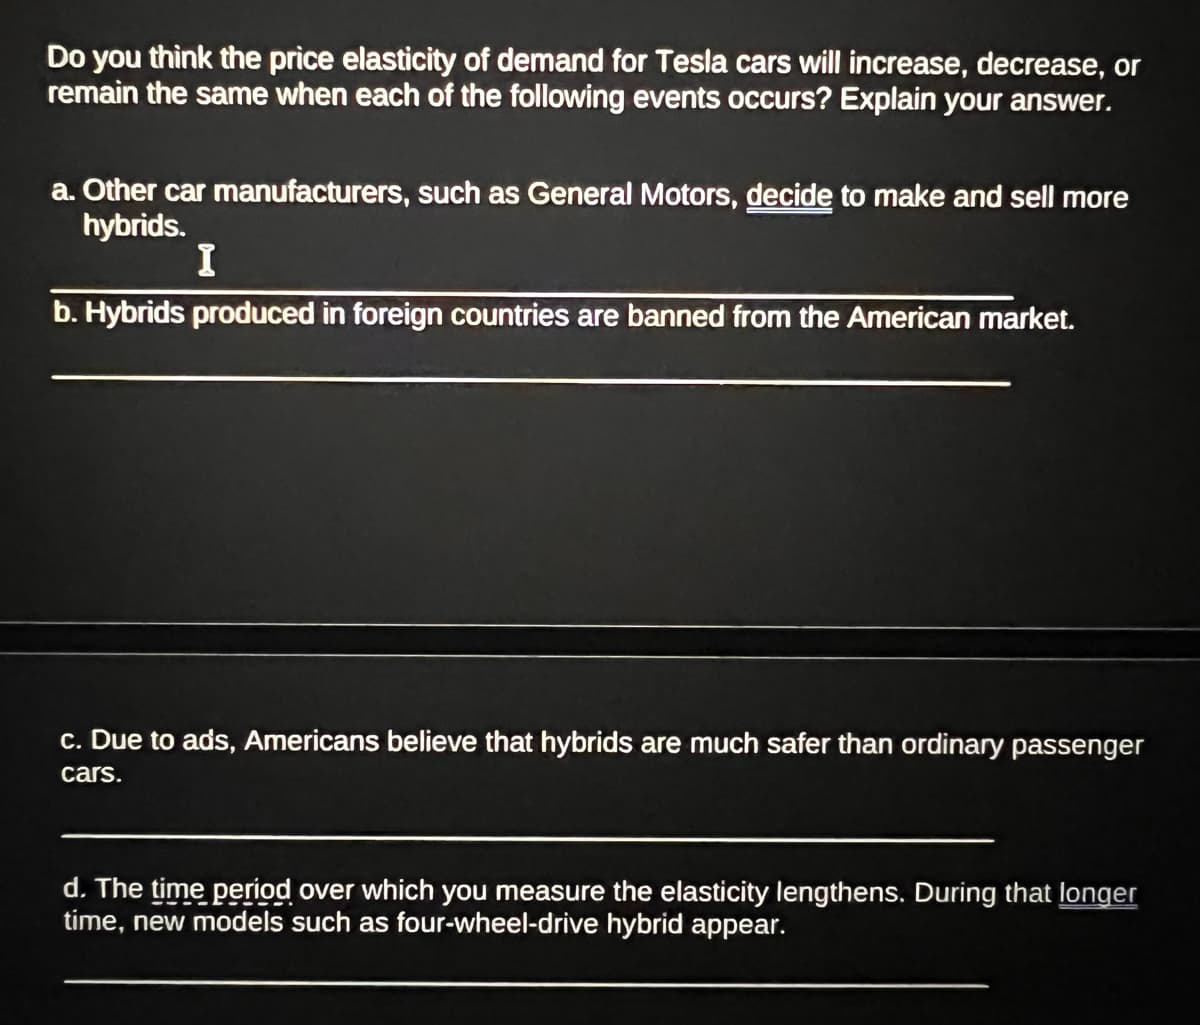 Do you think the price elasticity of demand for Tesla cars will increase, decrease, or
remain the same when each of the following events occurs? Explain your answer.
a. Other car manufacturers, such as General Motors, decide to make and sell more
hybrids.
I
b. Hybrids produced in foreign countries are banned from the American market.
c. Due to ads, Americans believe that hybrids are much safer than ordinary passenger
cars.
d. The time period over which you measure the elasticity lengthens. During that longer
time, new models such as four-wheel-drive hybrid appear.